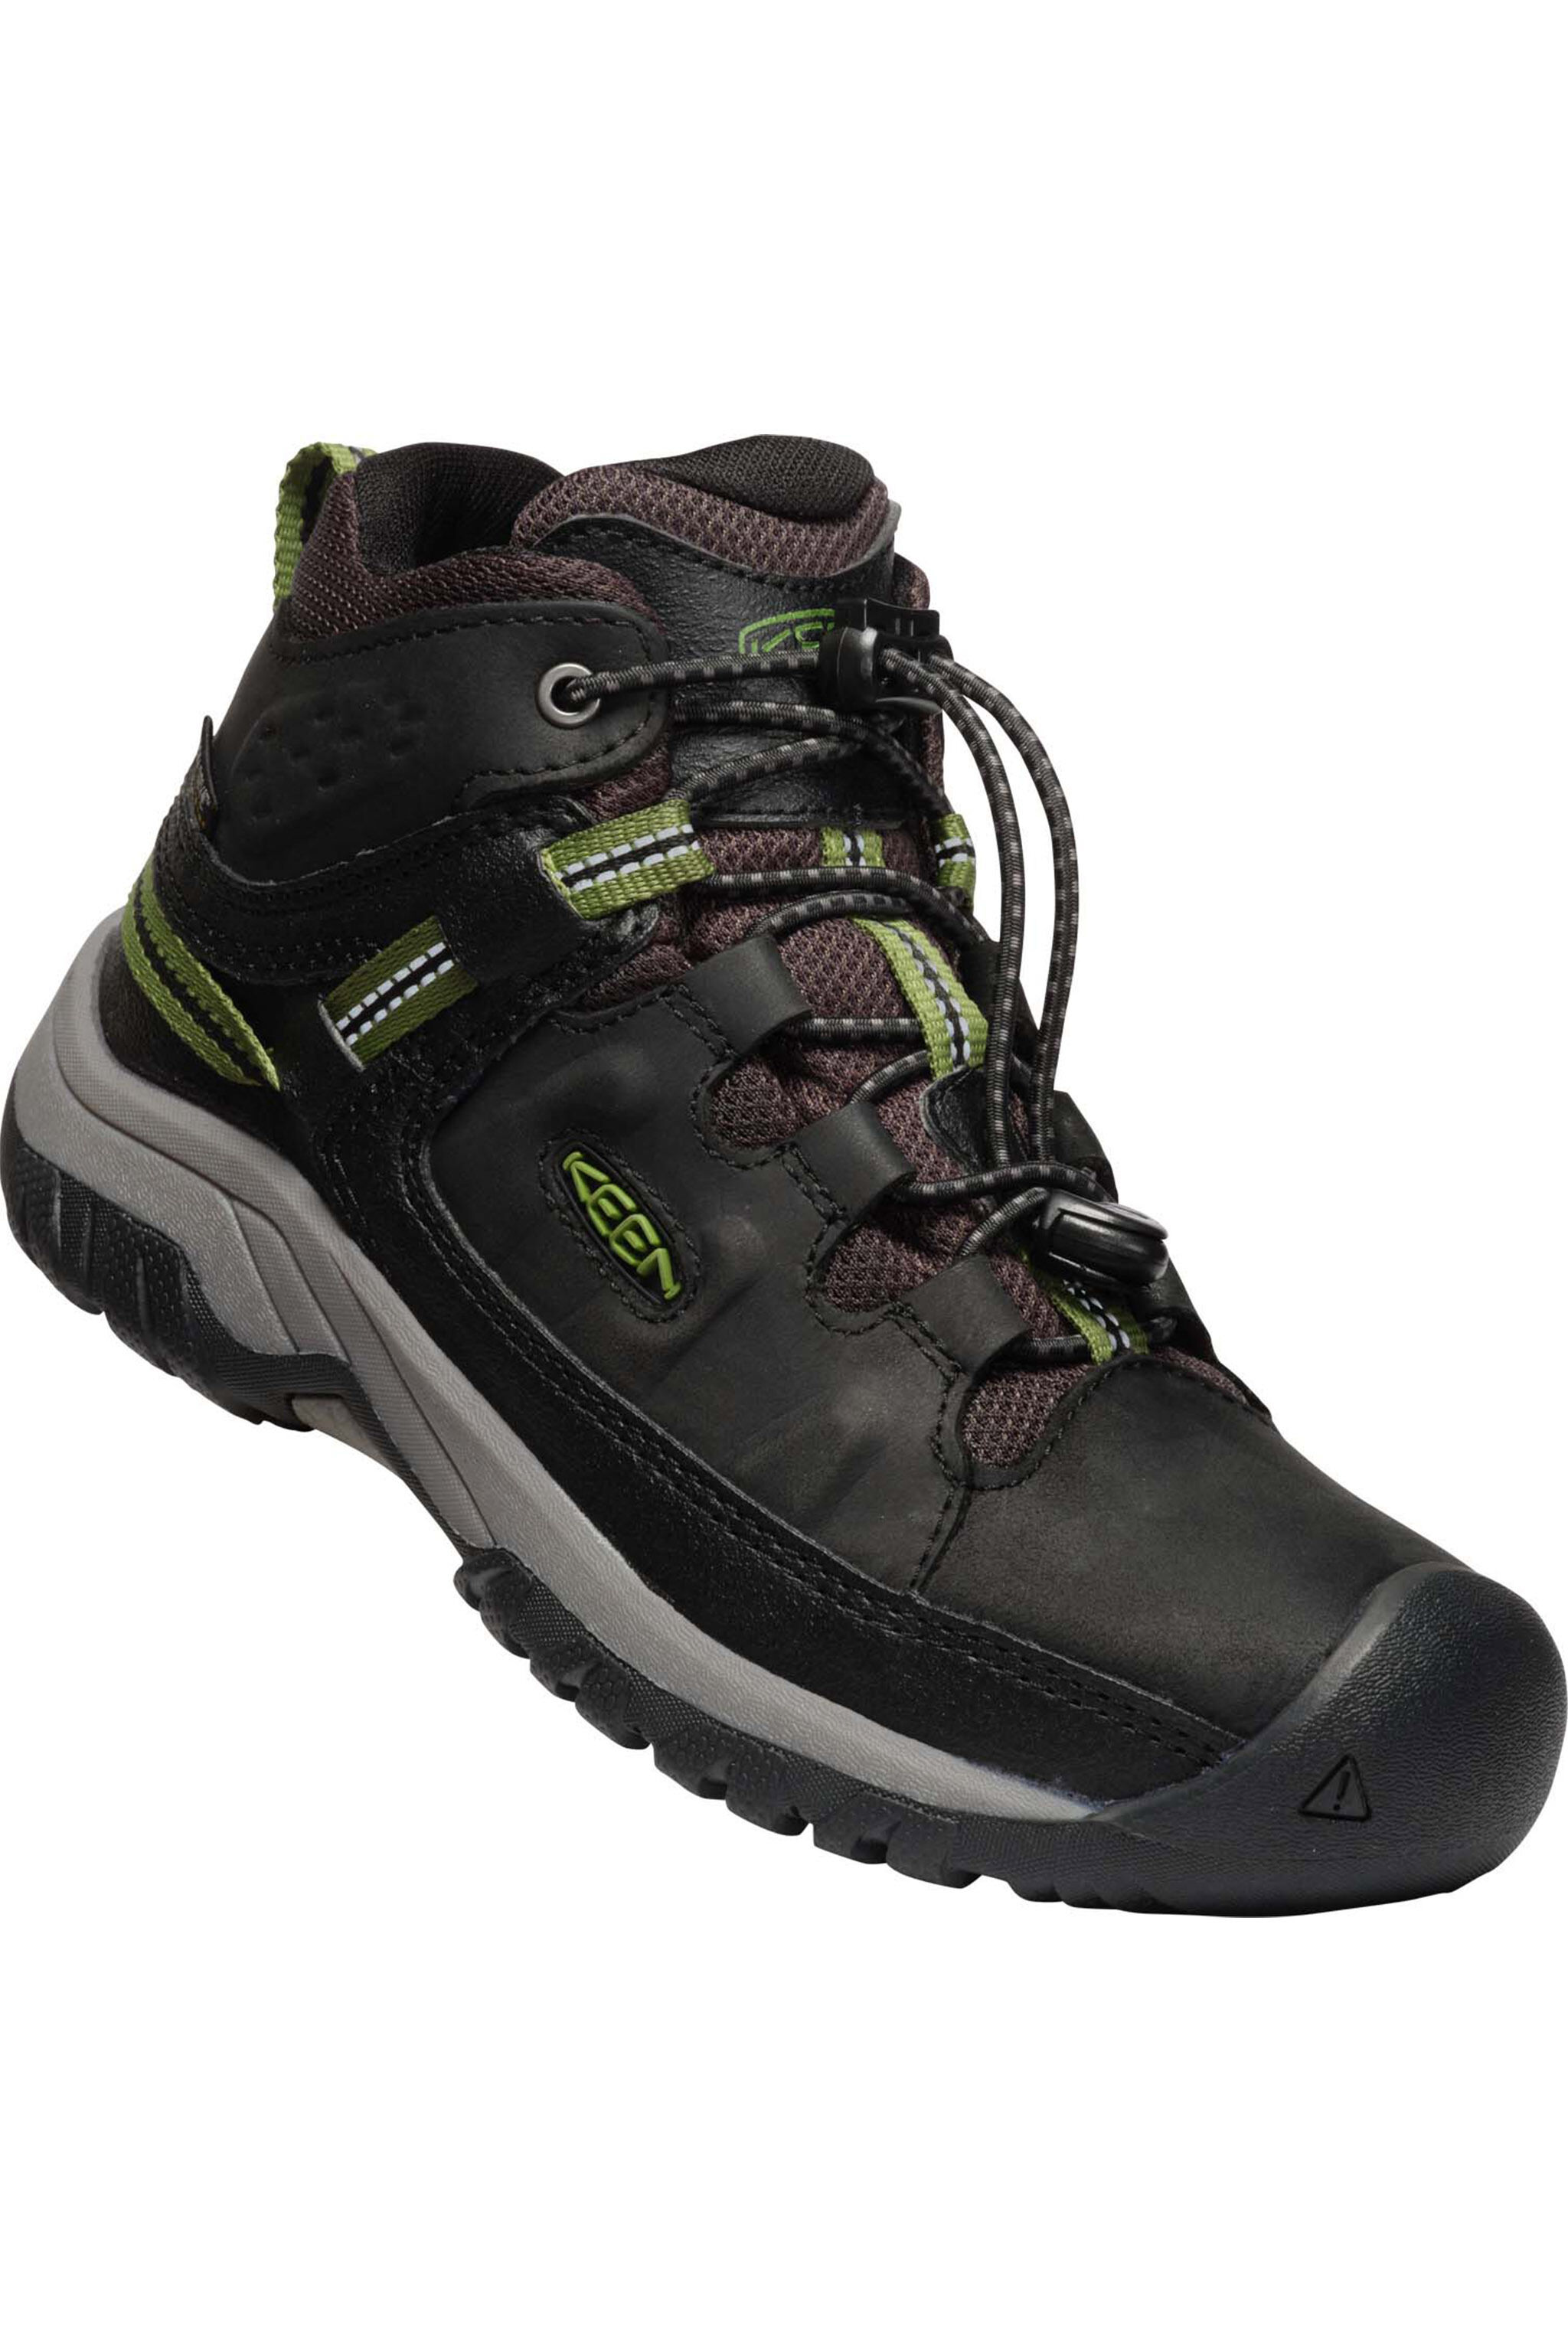 youth hiking boots clearance